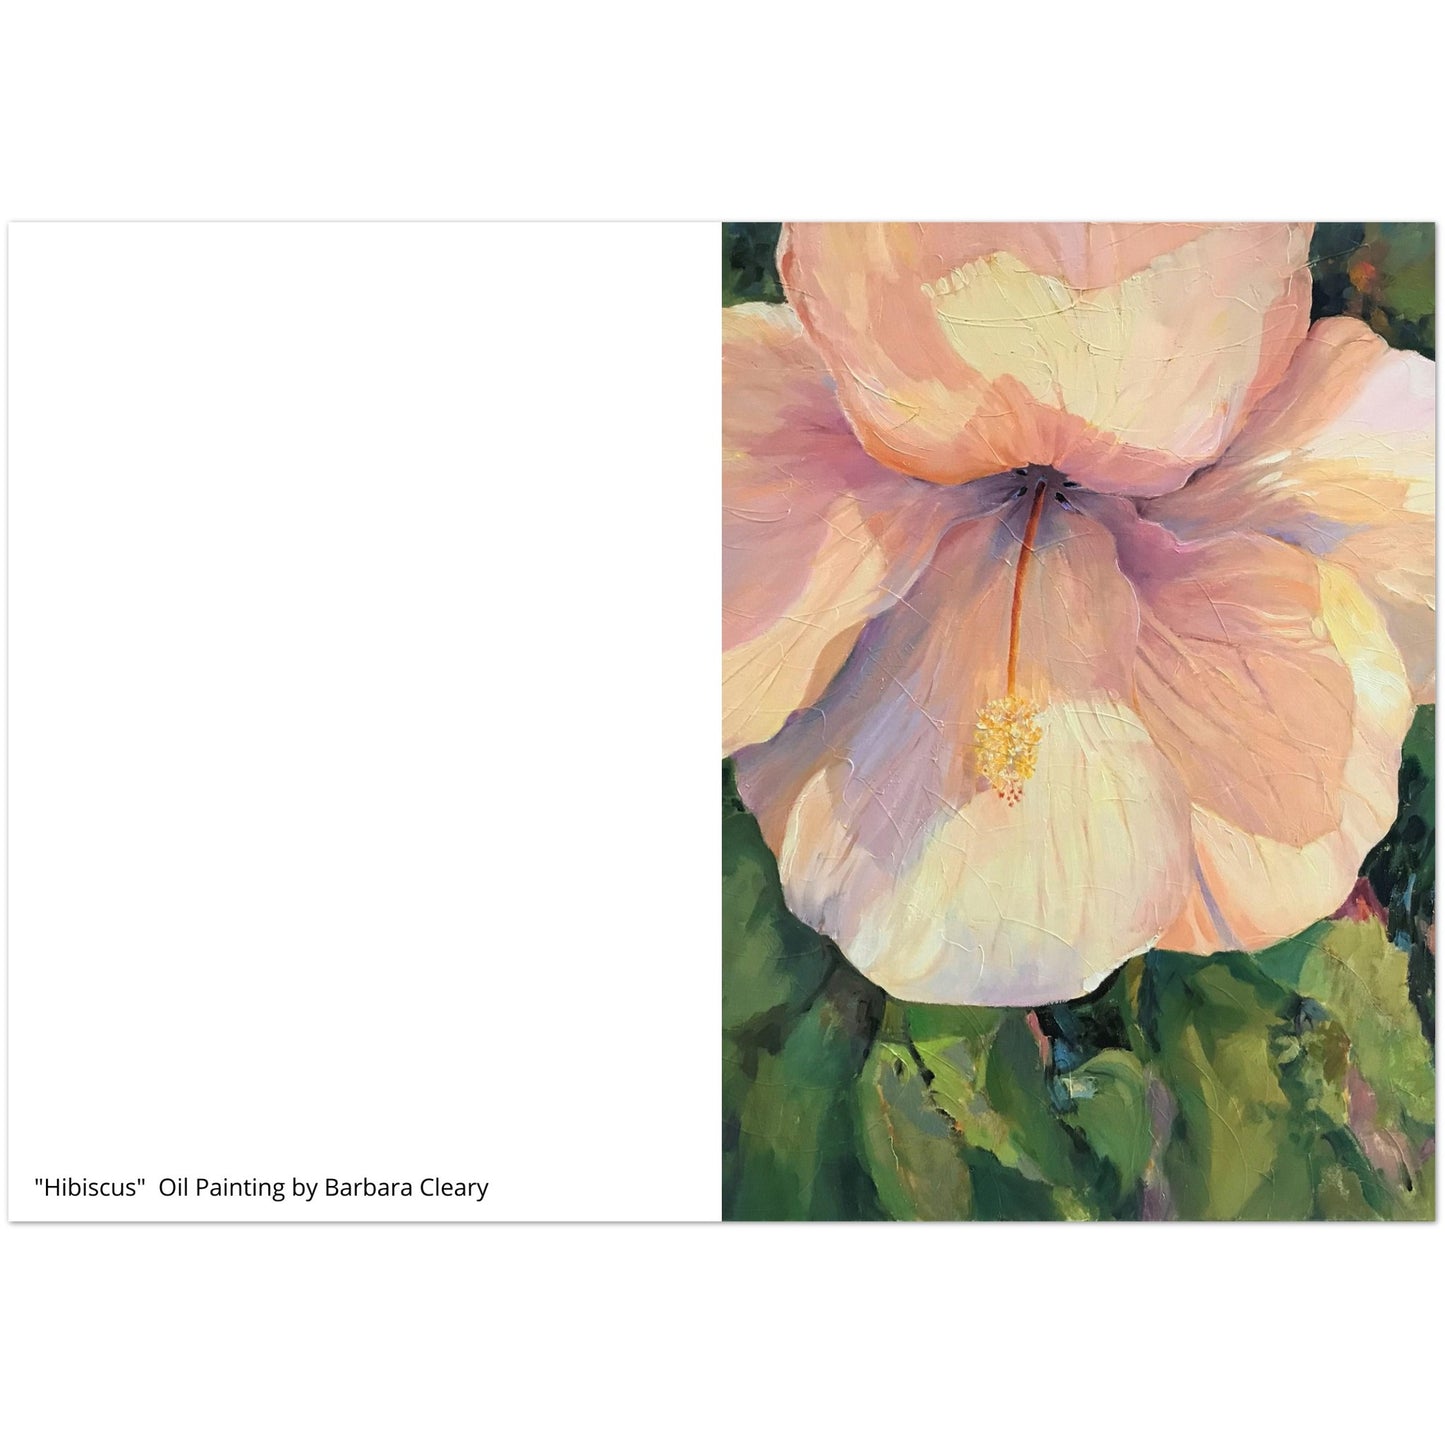 "Hibiscus" Pack of 10 Greeting Cards (standard envelopes) (US & CA) by Barbara Cleary Designs